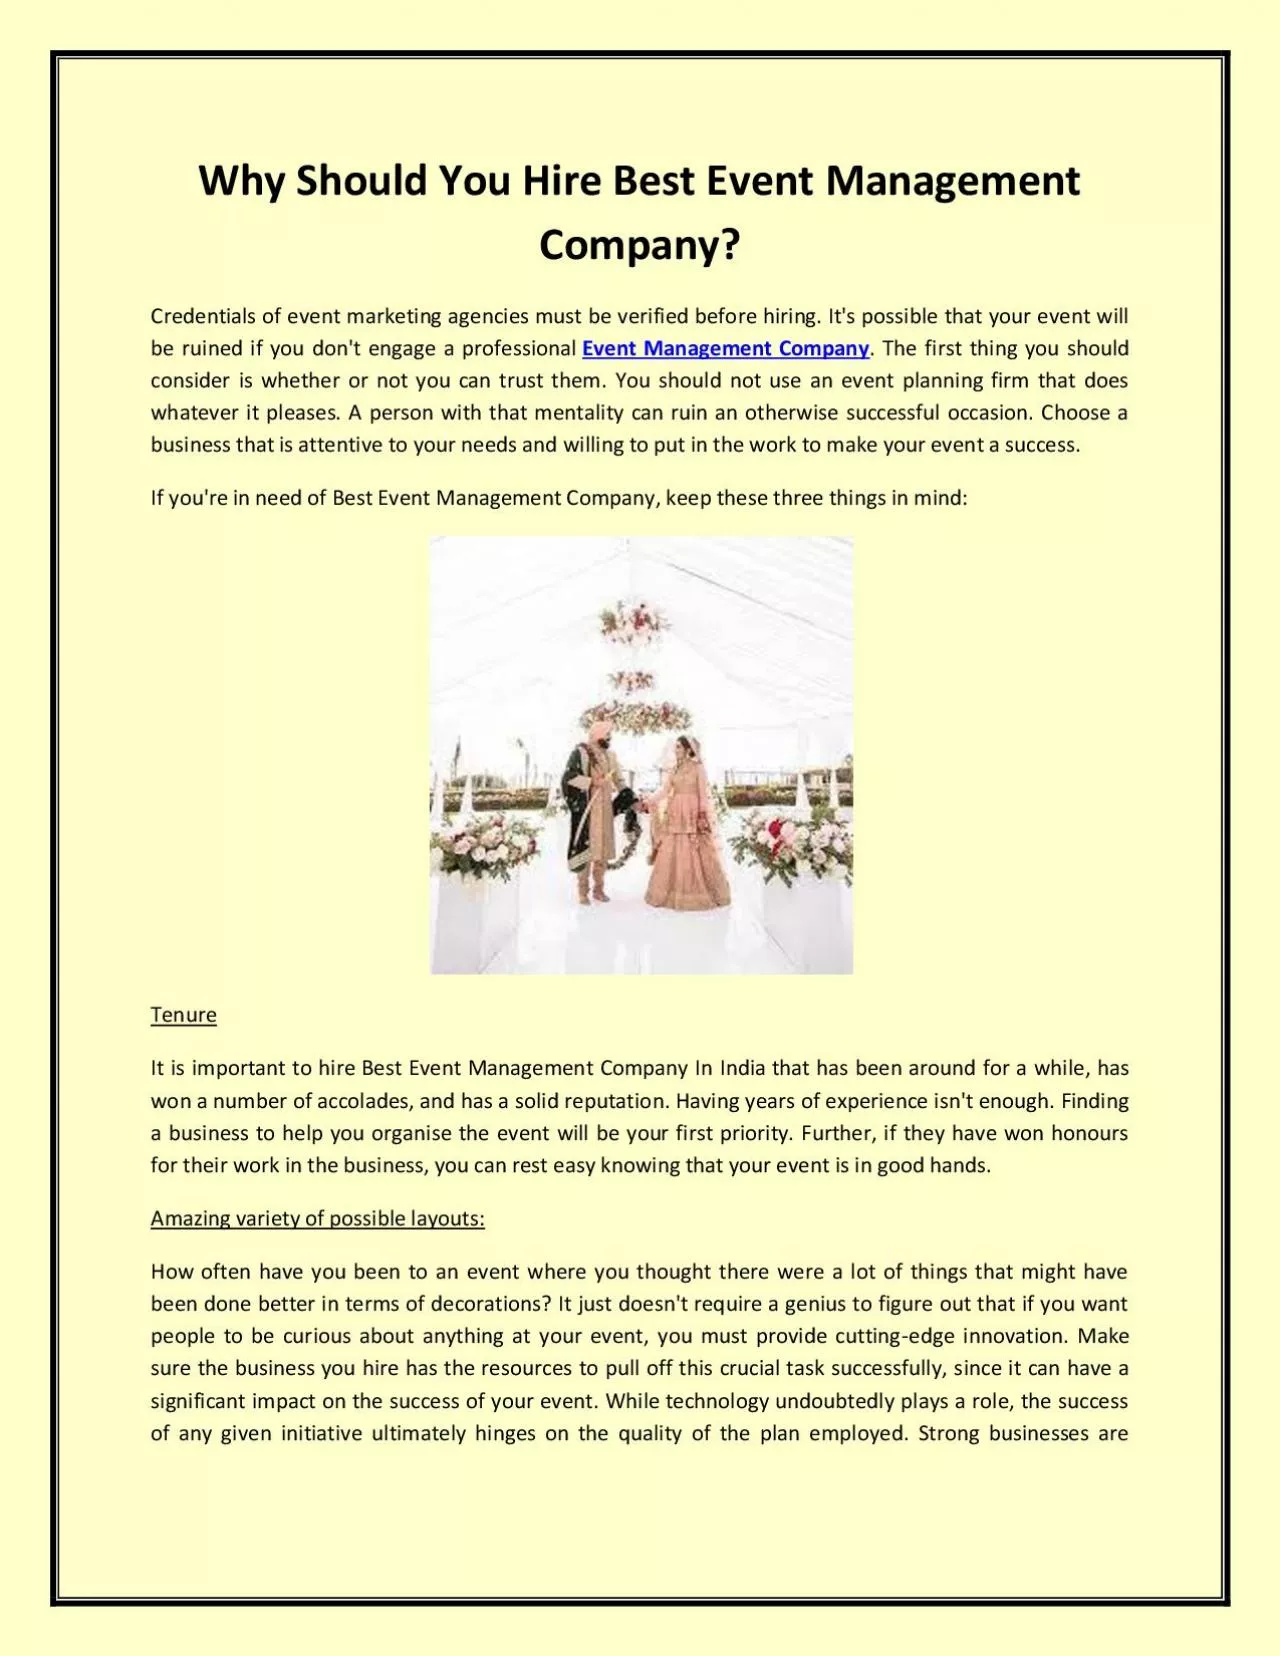 Why Should You Hire Best Event Management Company?